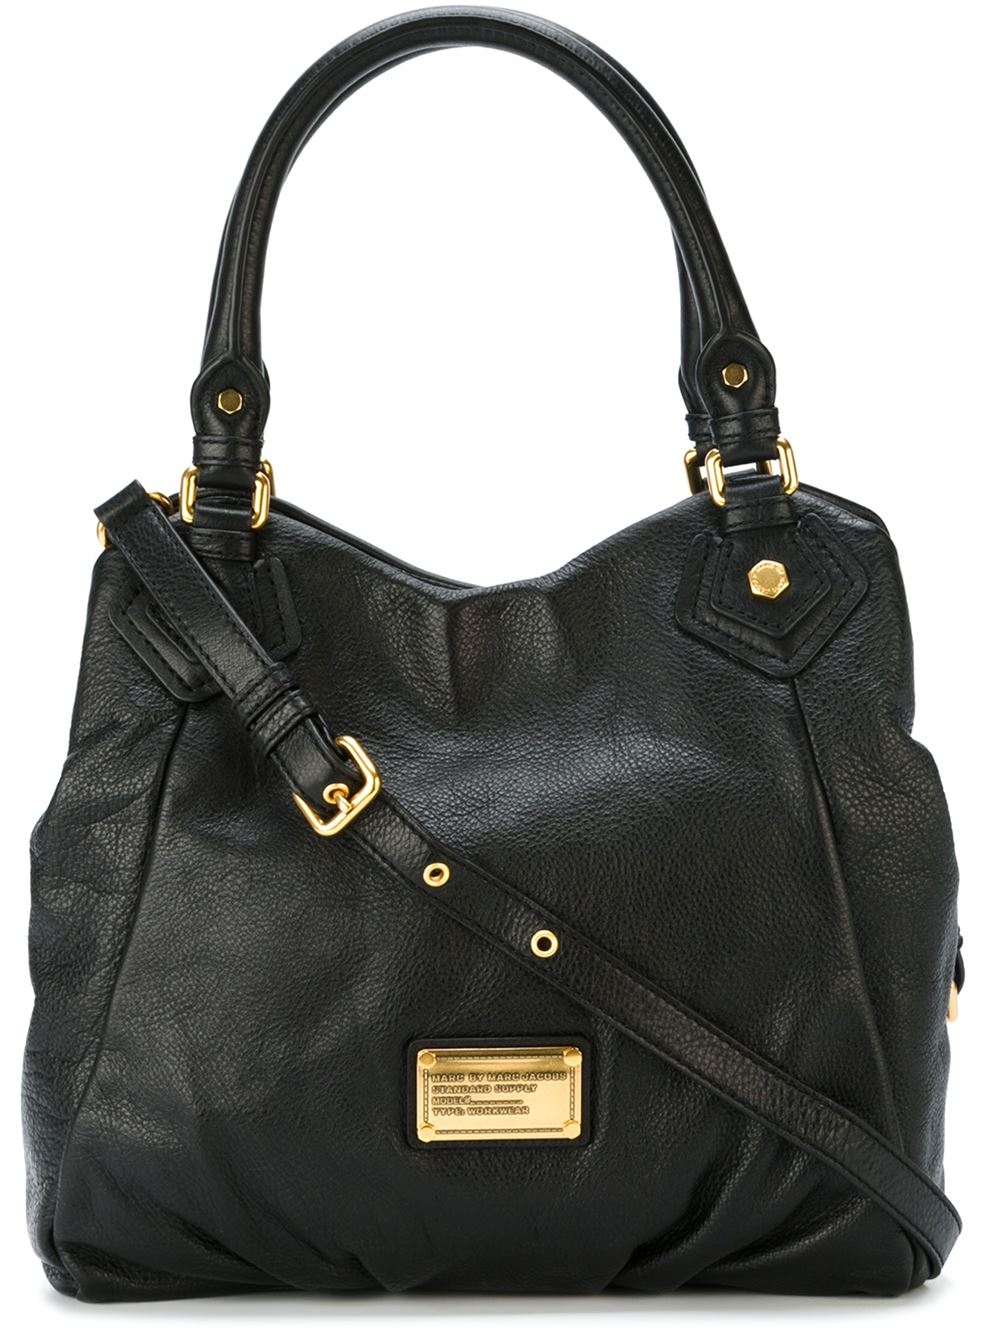 Marc by marc jacobs 'classic Q Francesca' Tote in Black | Lyst